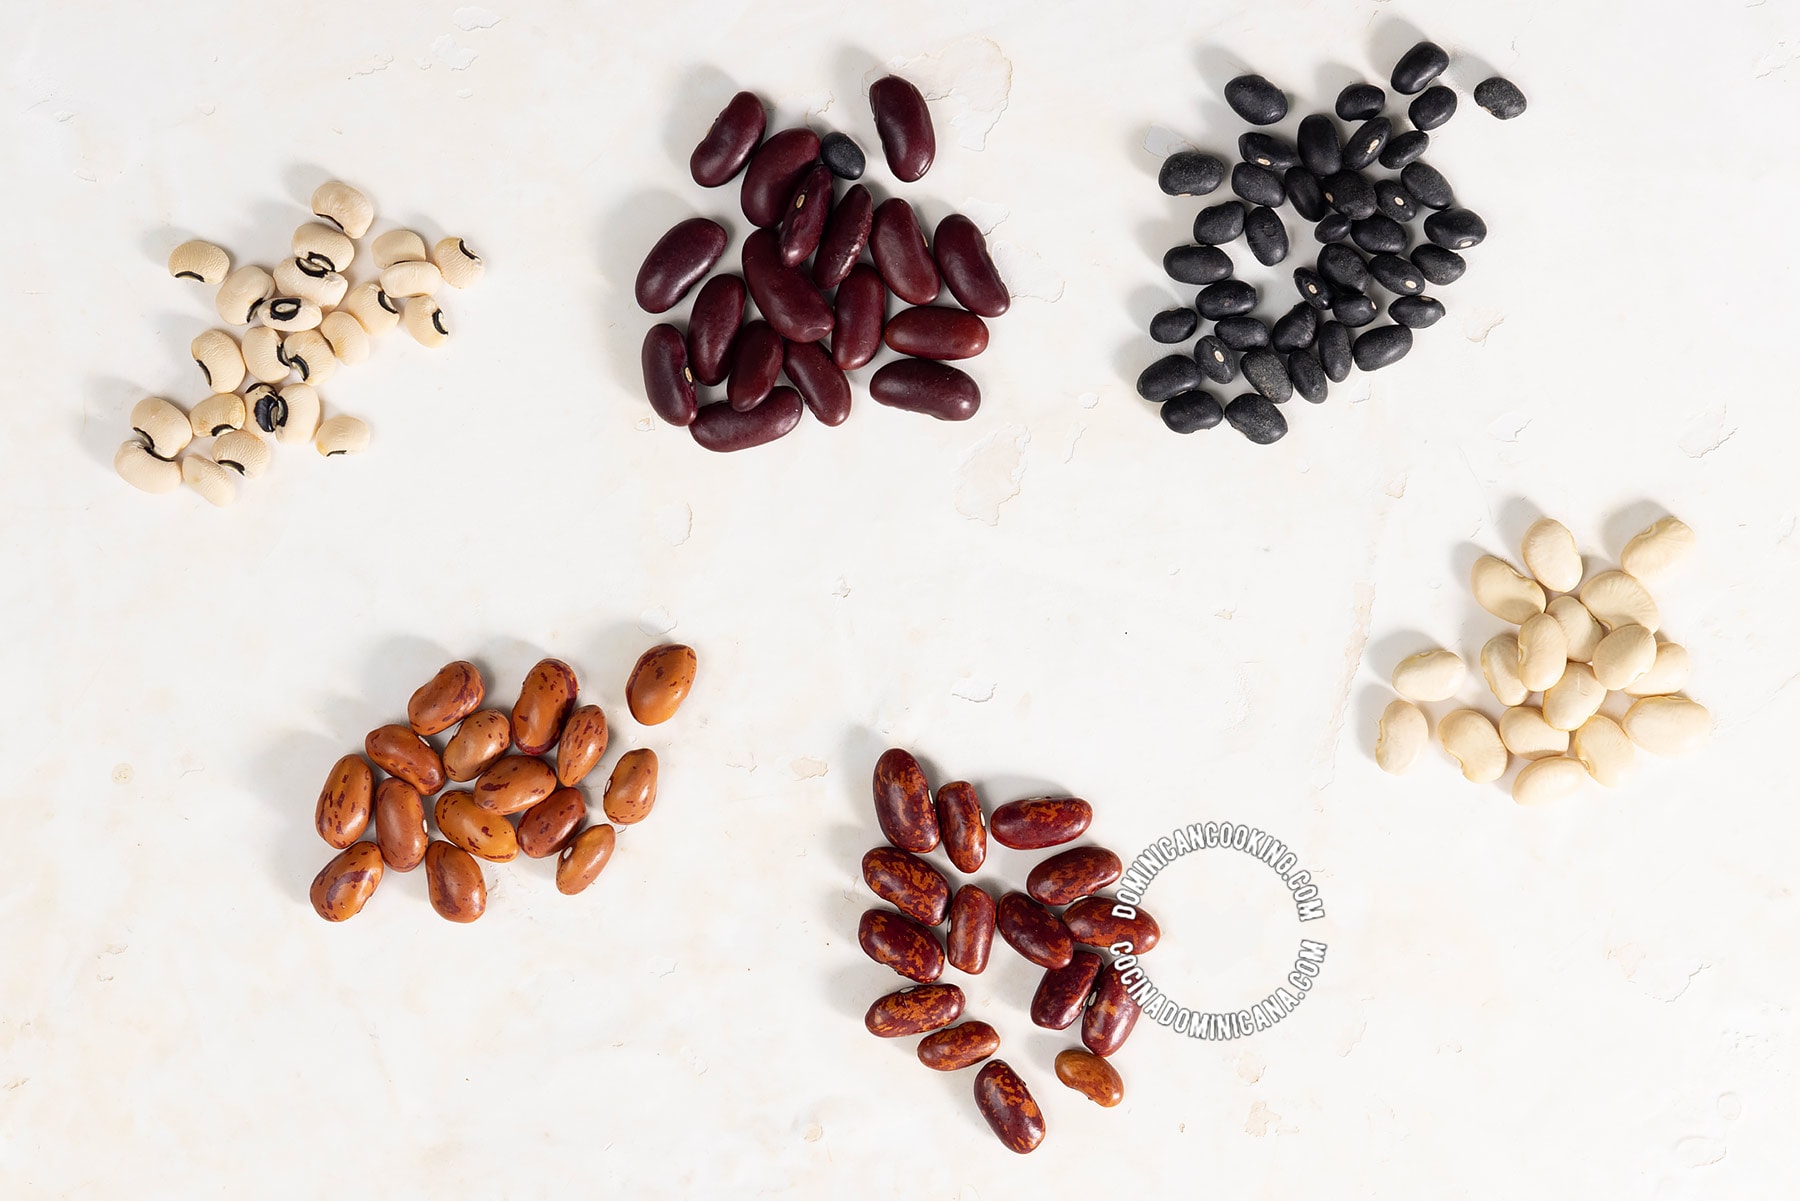 Different types of beans.